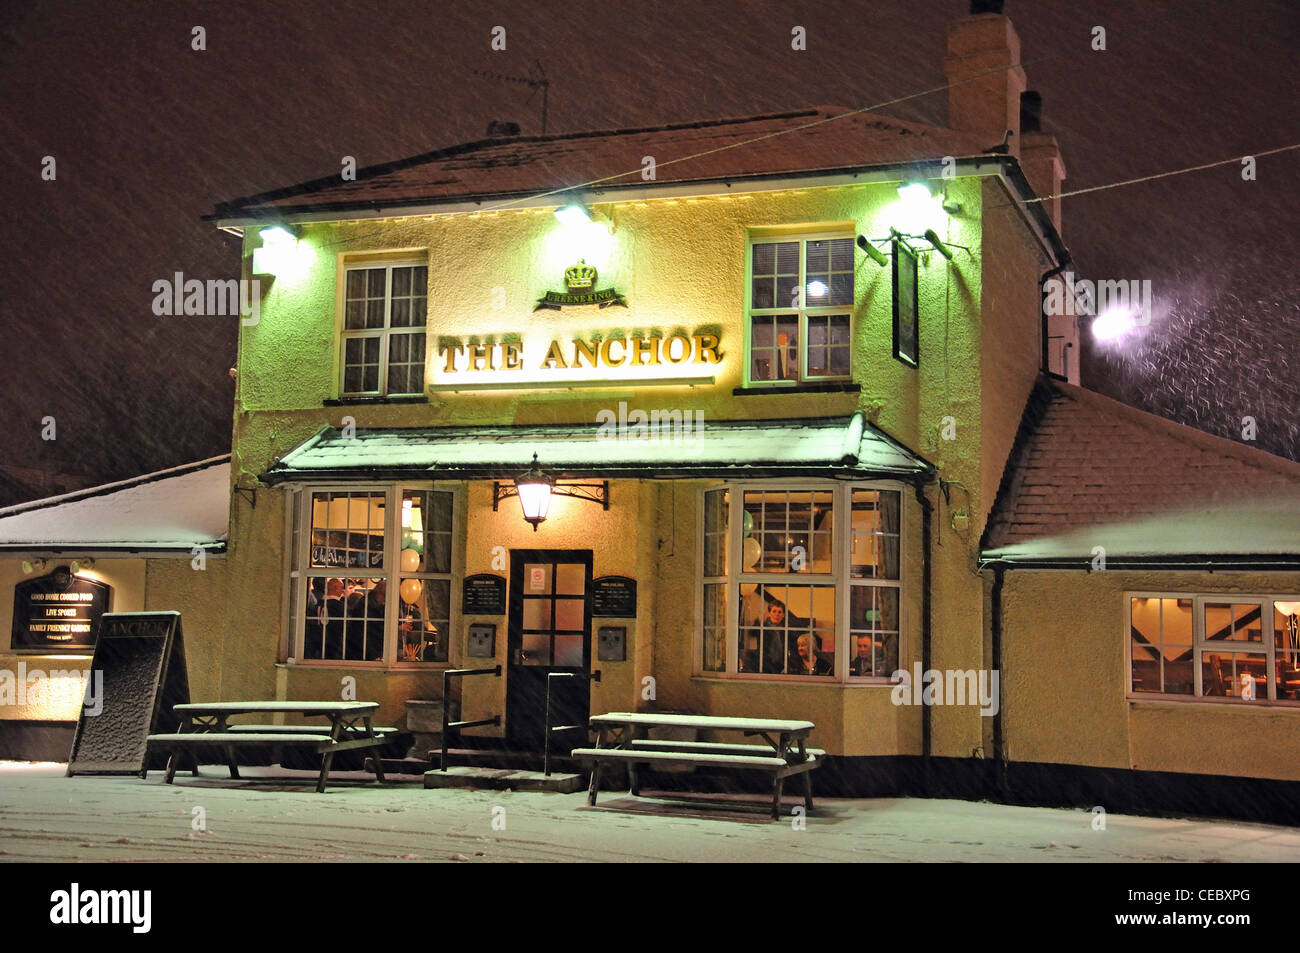 The Anchor Pub in winter snow, Stanwell Moor, Borough of Spelthorne, Surrey, England, United Kingdom Stock Photo